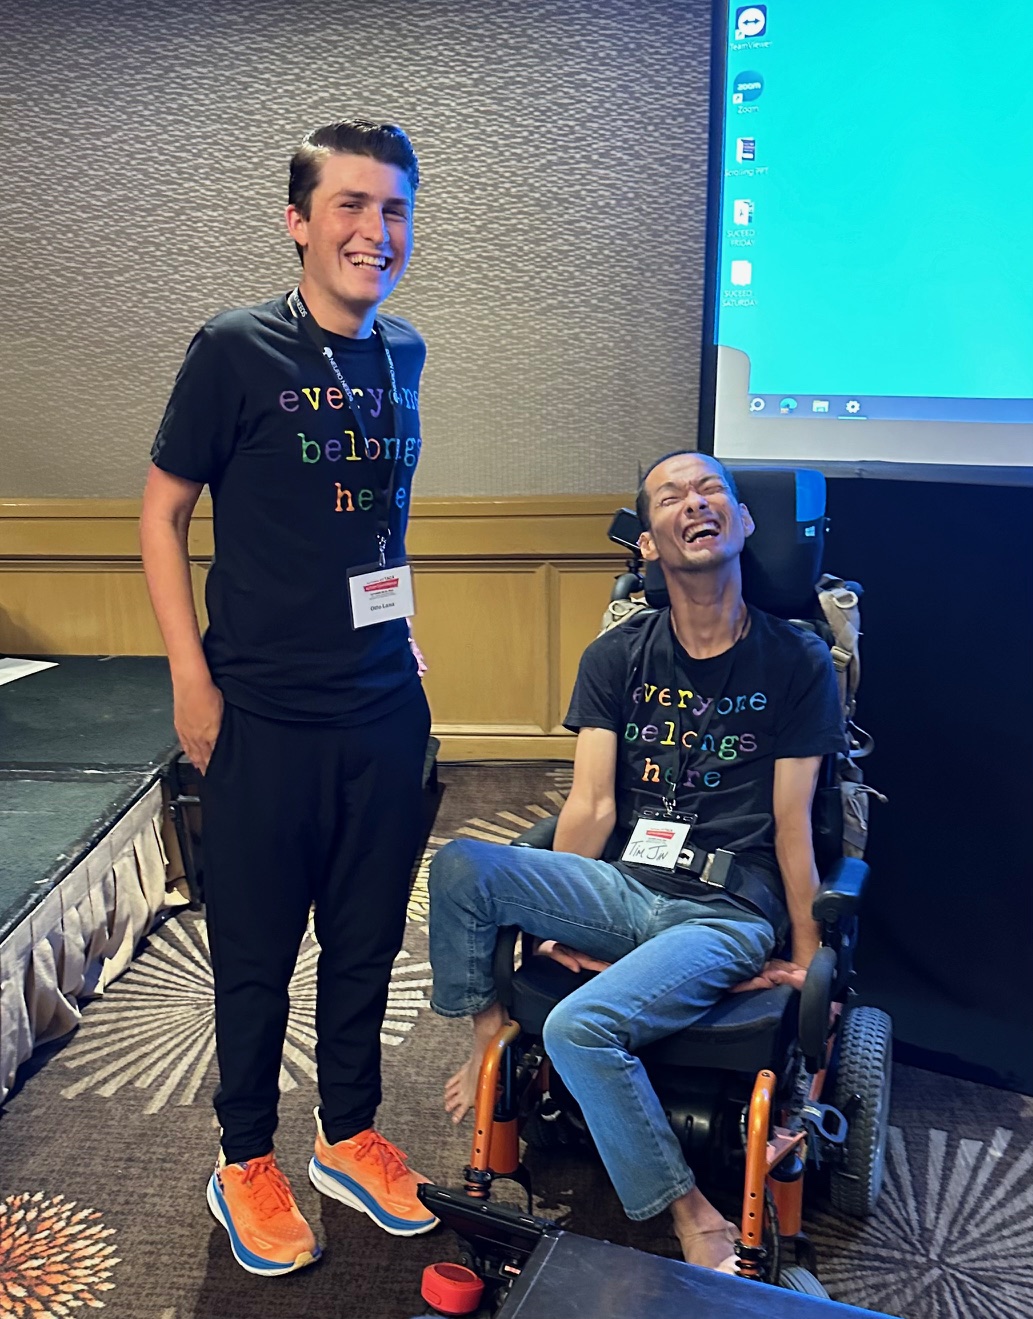 two men wearing short sleeve black t-shirts with the words "Everyone Belongs Here" printed in multicolored font. The young caucasian man named Otto is on the left and smiling broadly with Tim next to him. Tim is an Asian man also smiling broadly seated in a motorized wheelchair. Both men have short brunette hair stylishly gelled back. They are wearing lanyards from the conference they are presenting at together. This is a picture of great joy.